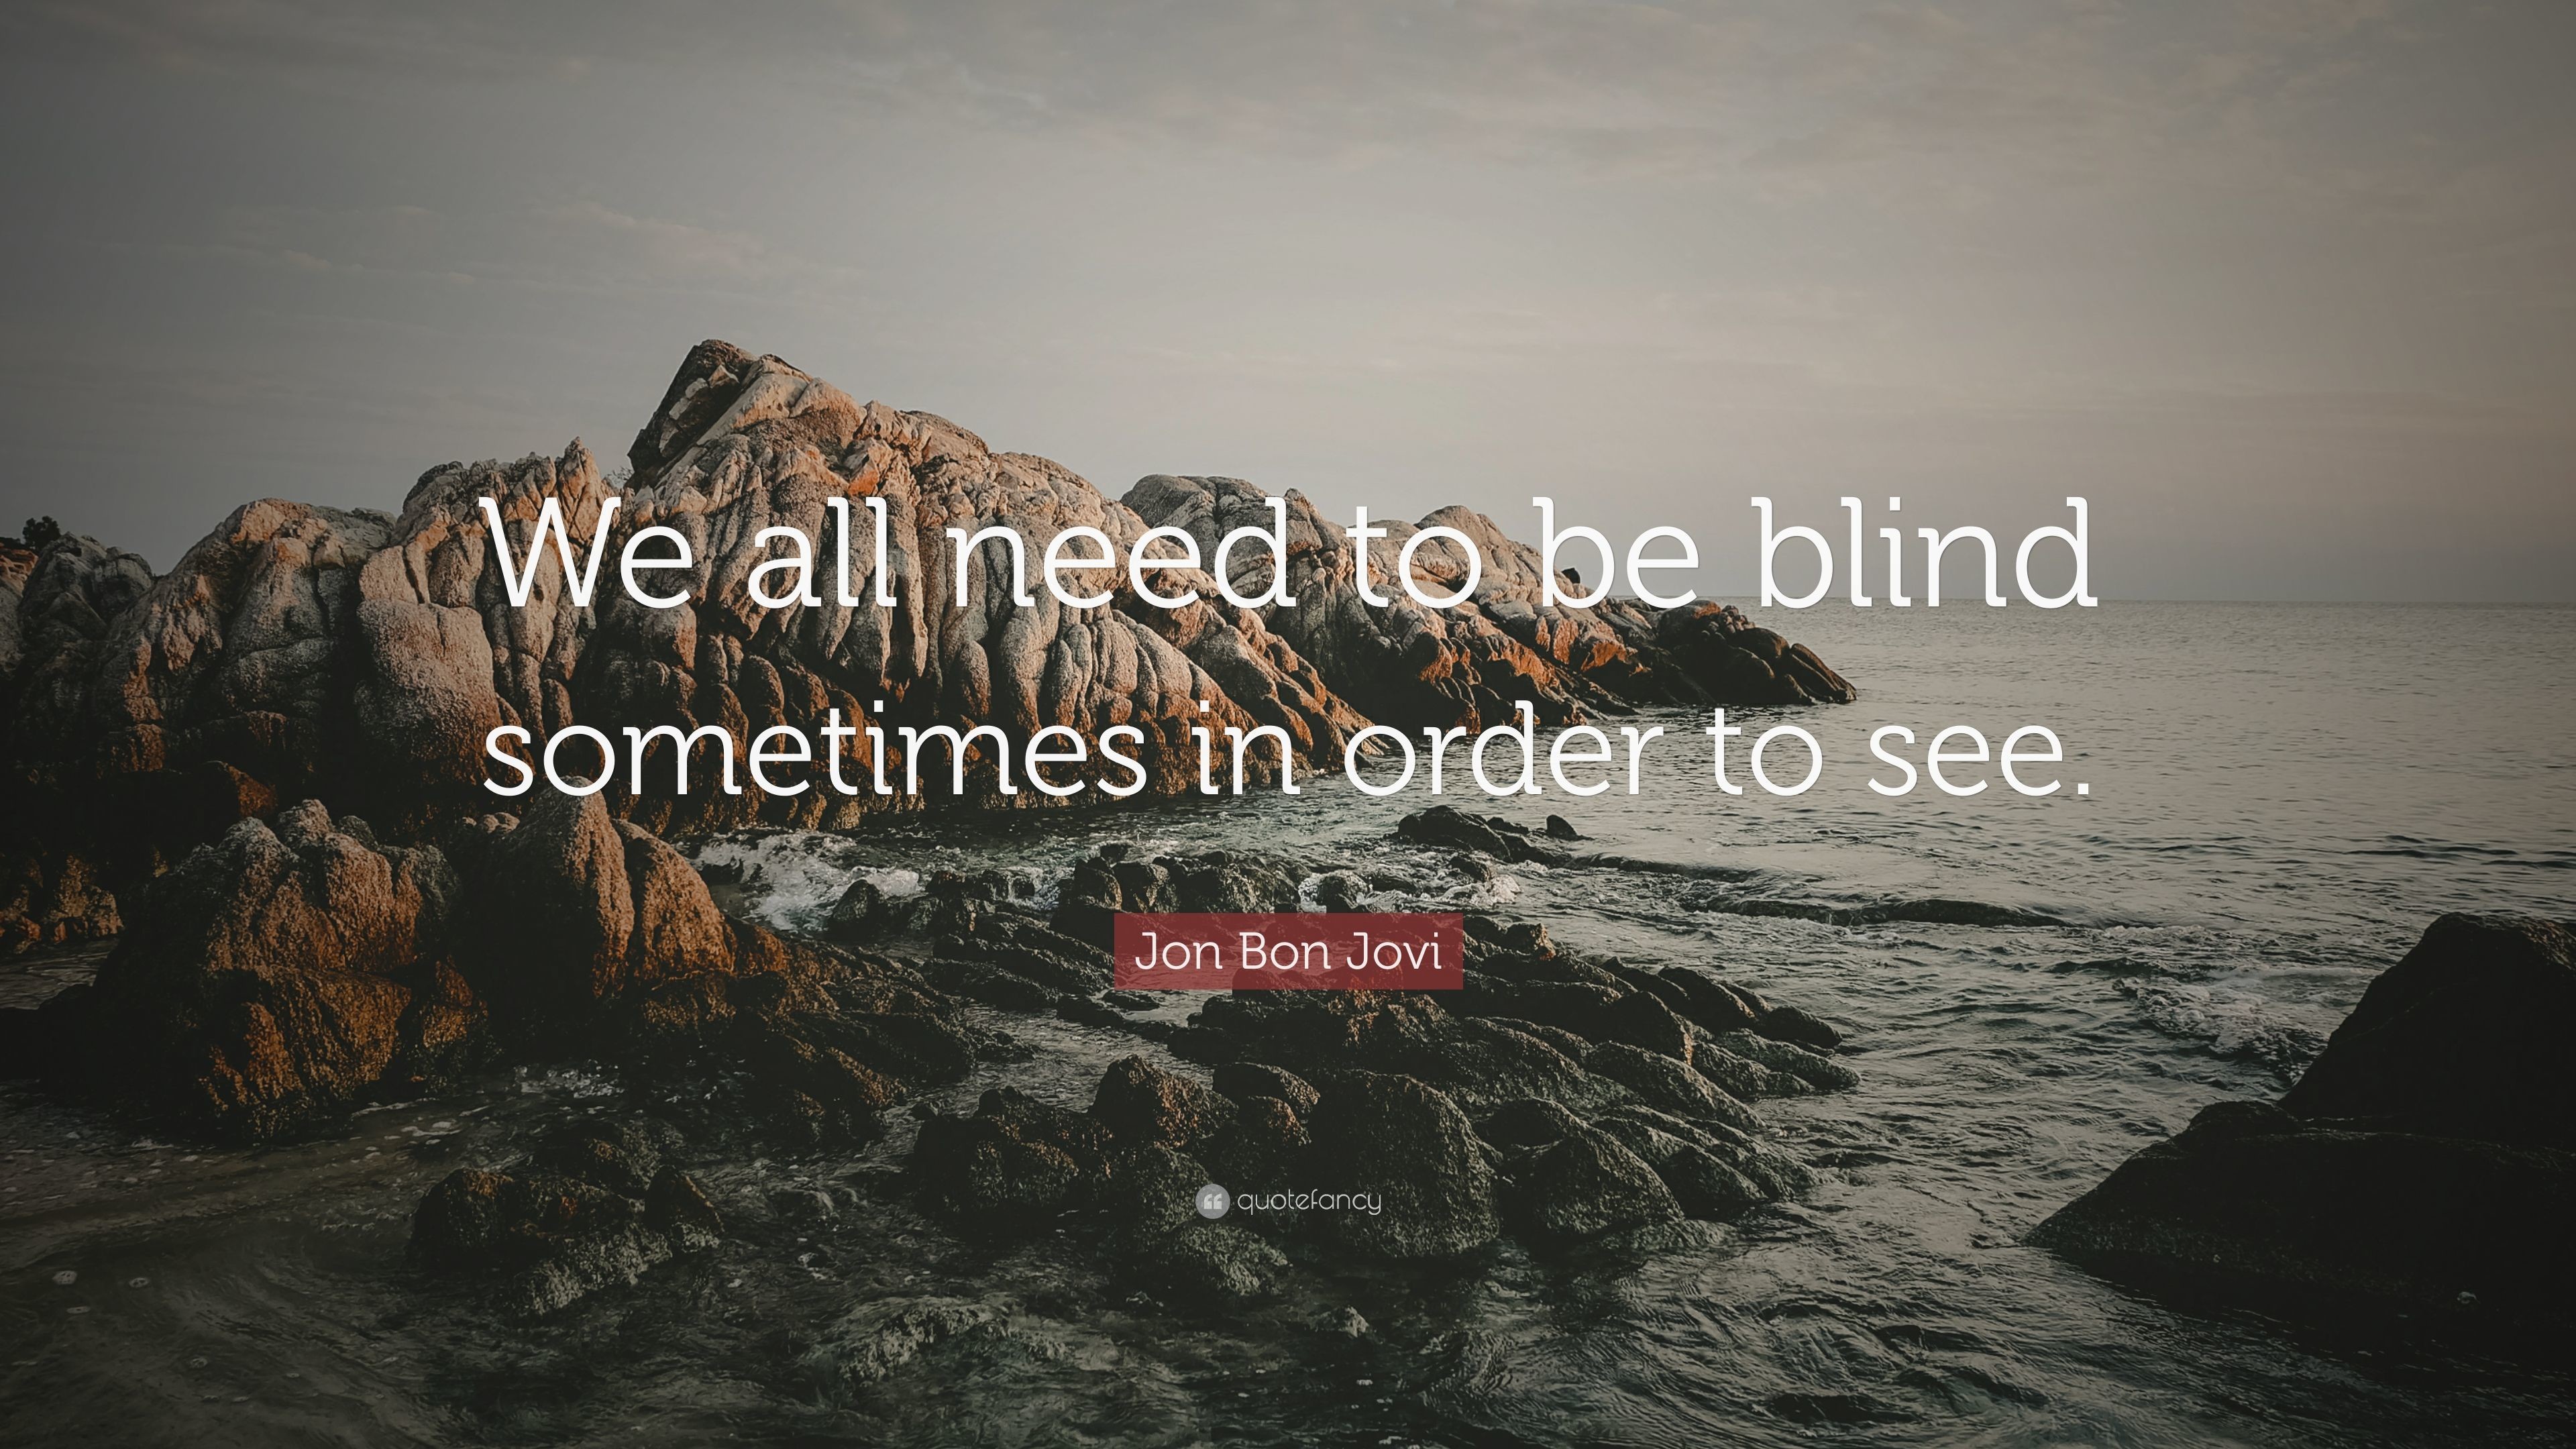 3840x2160 Jon Bon Jovi Quote: “We all need to be blind sometimes in order to